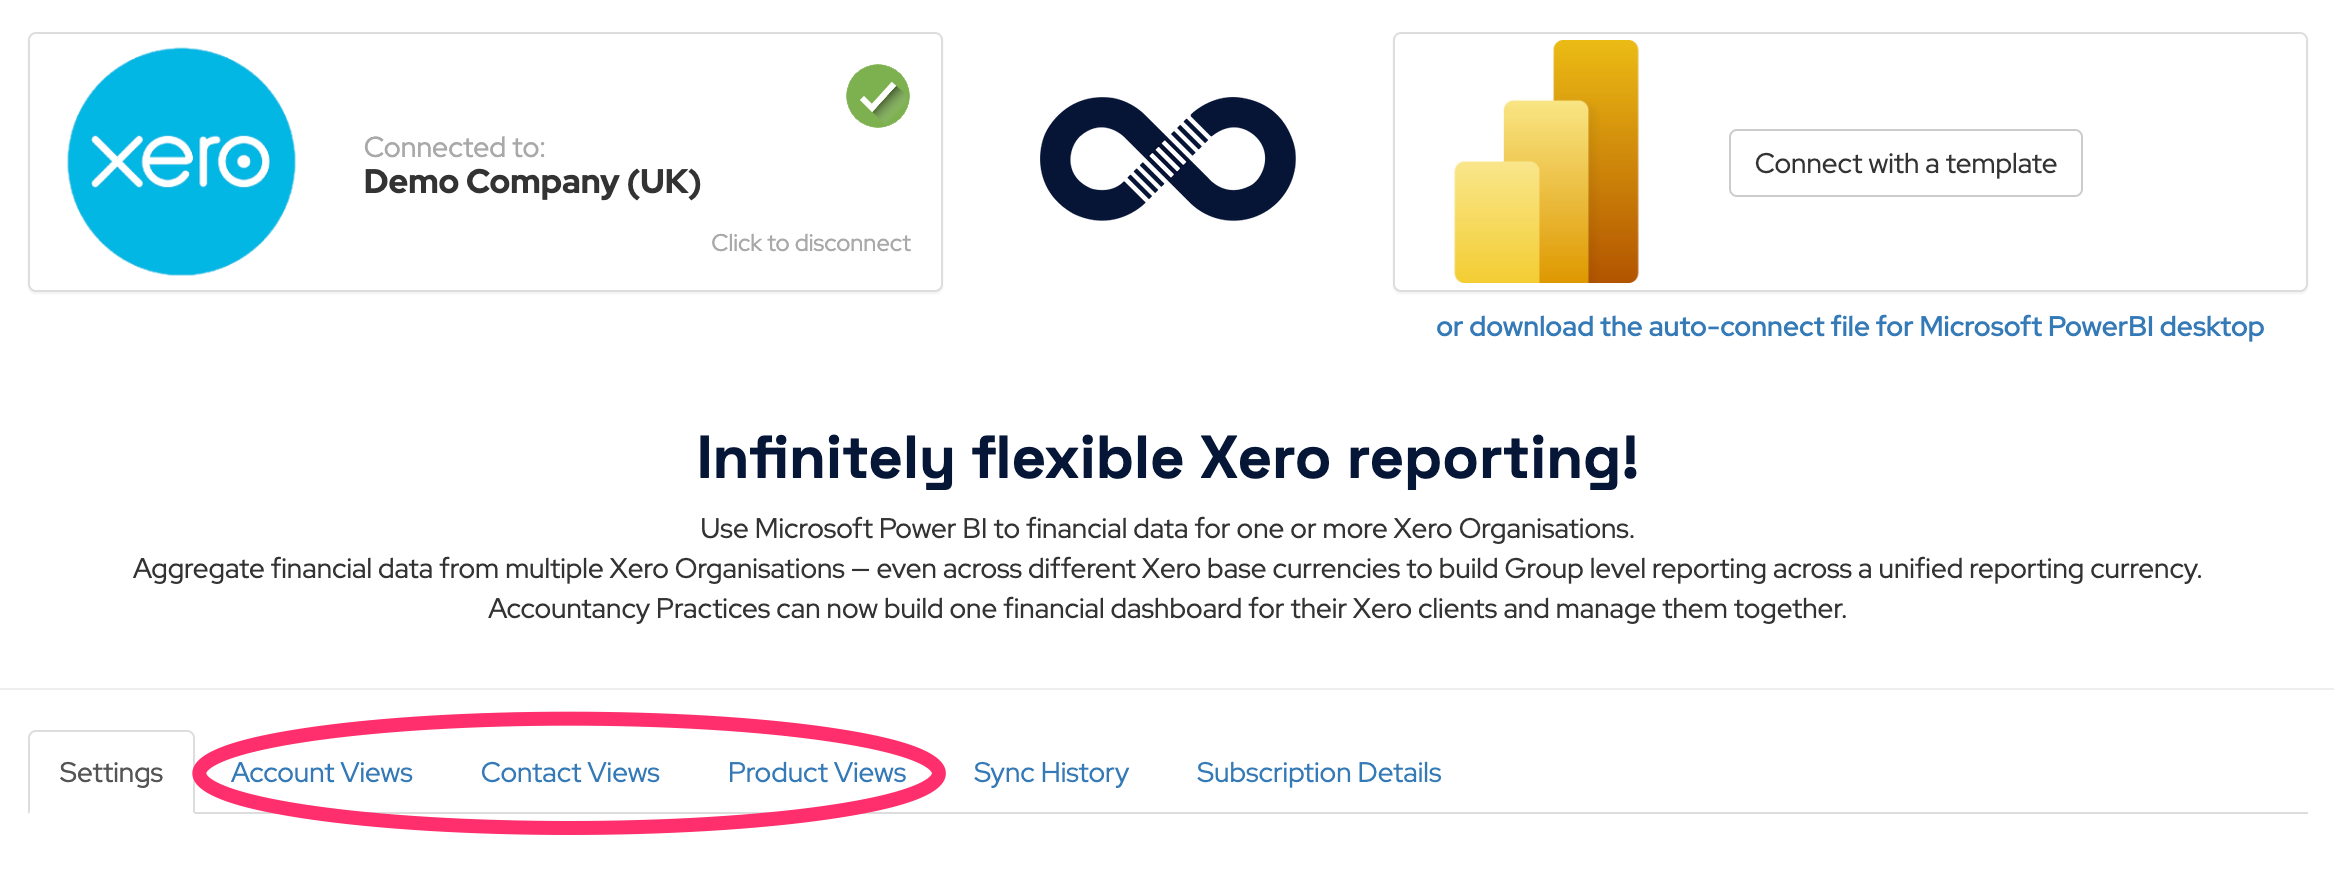 connectorly_views Creating and Utilizing Views in Power BI Desktop with Connectorly for Xero & Power BI